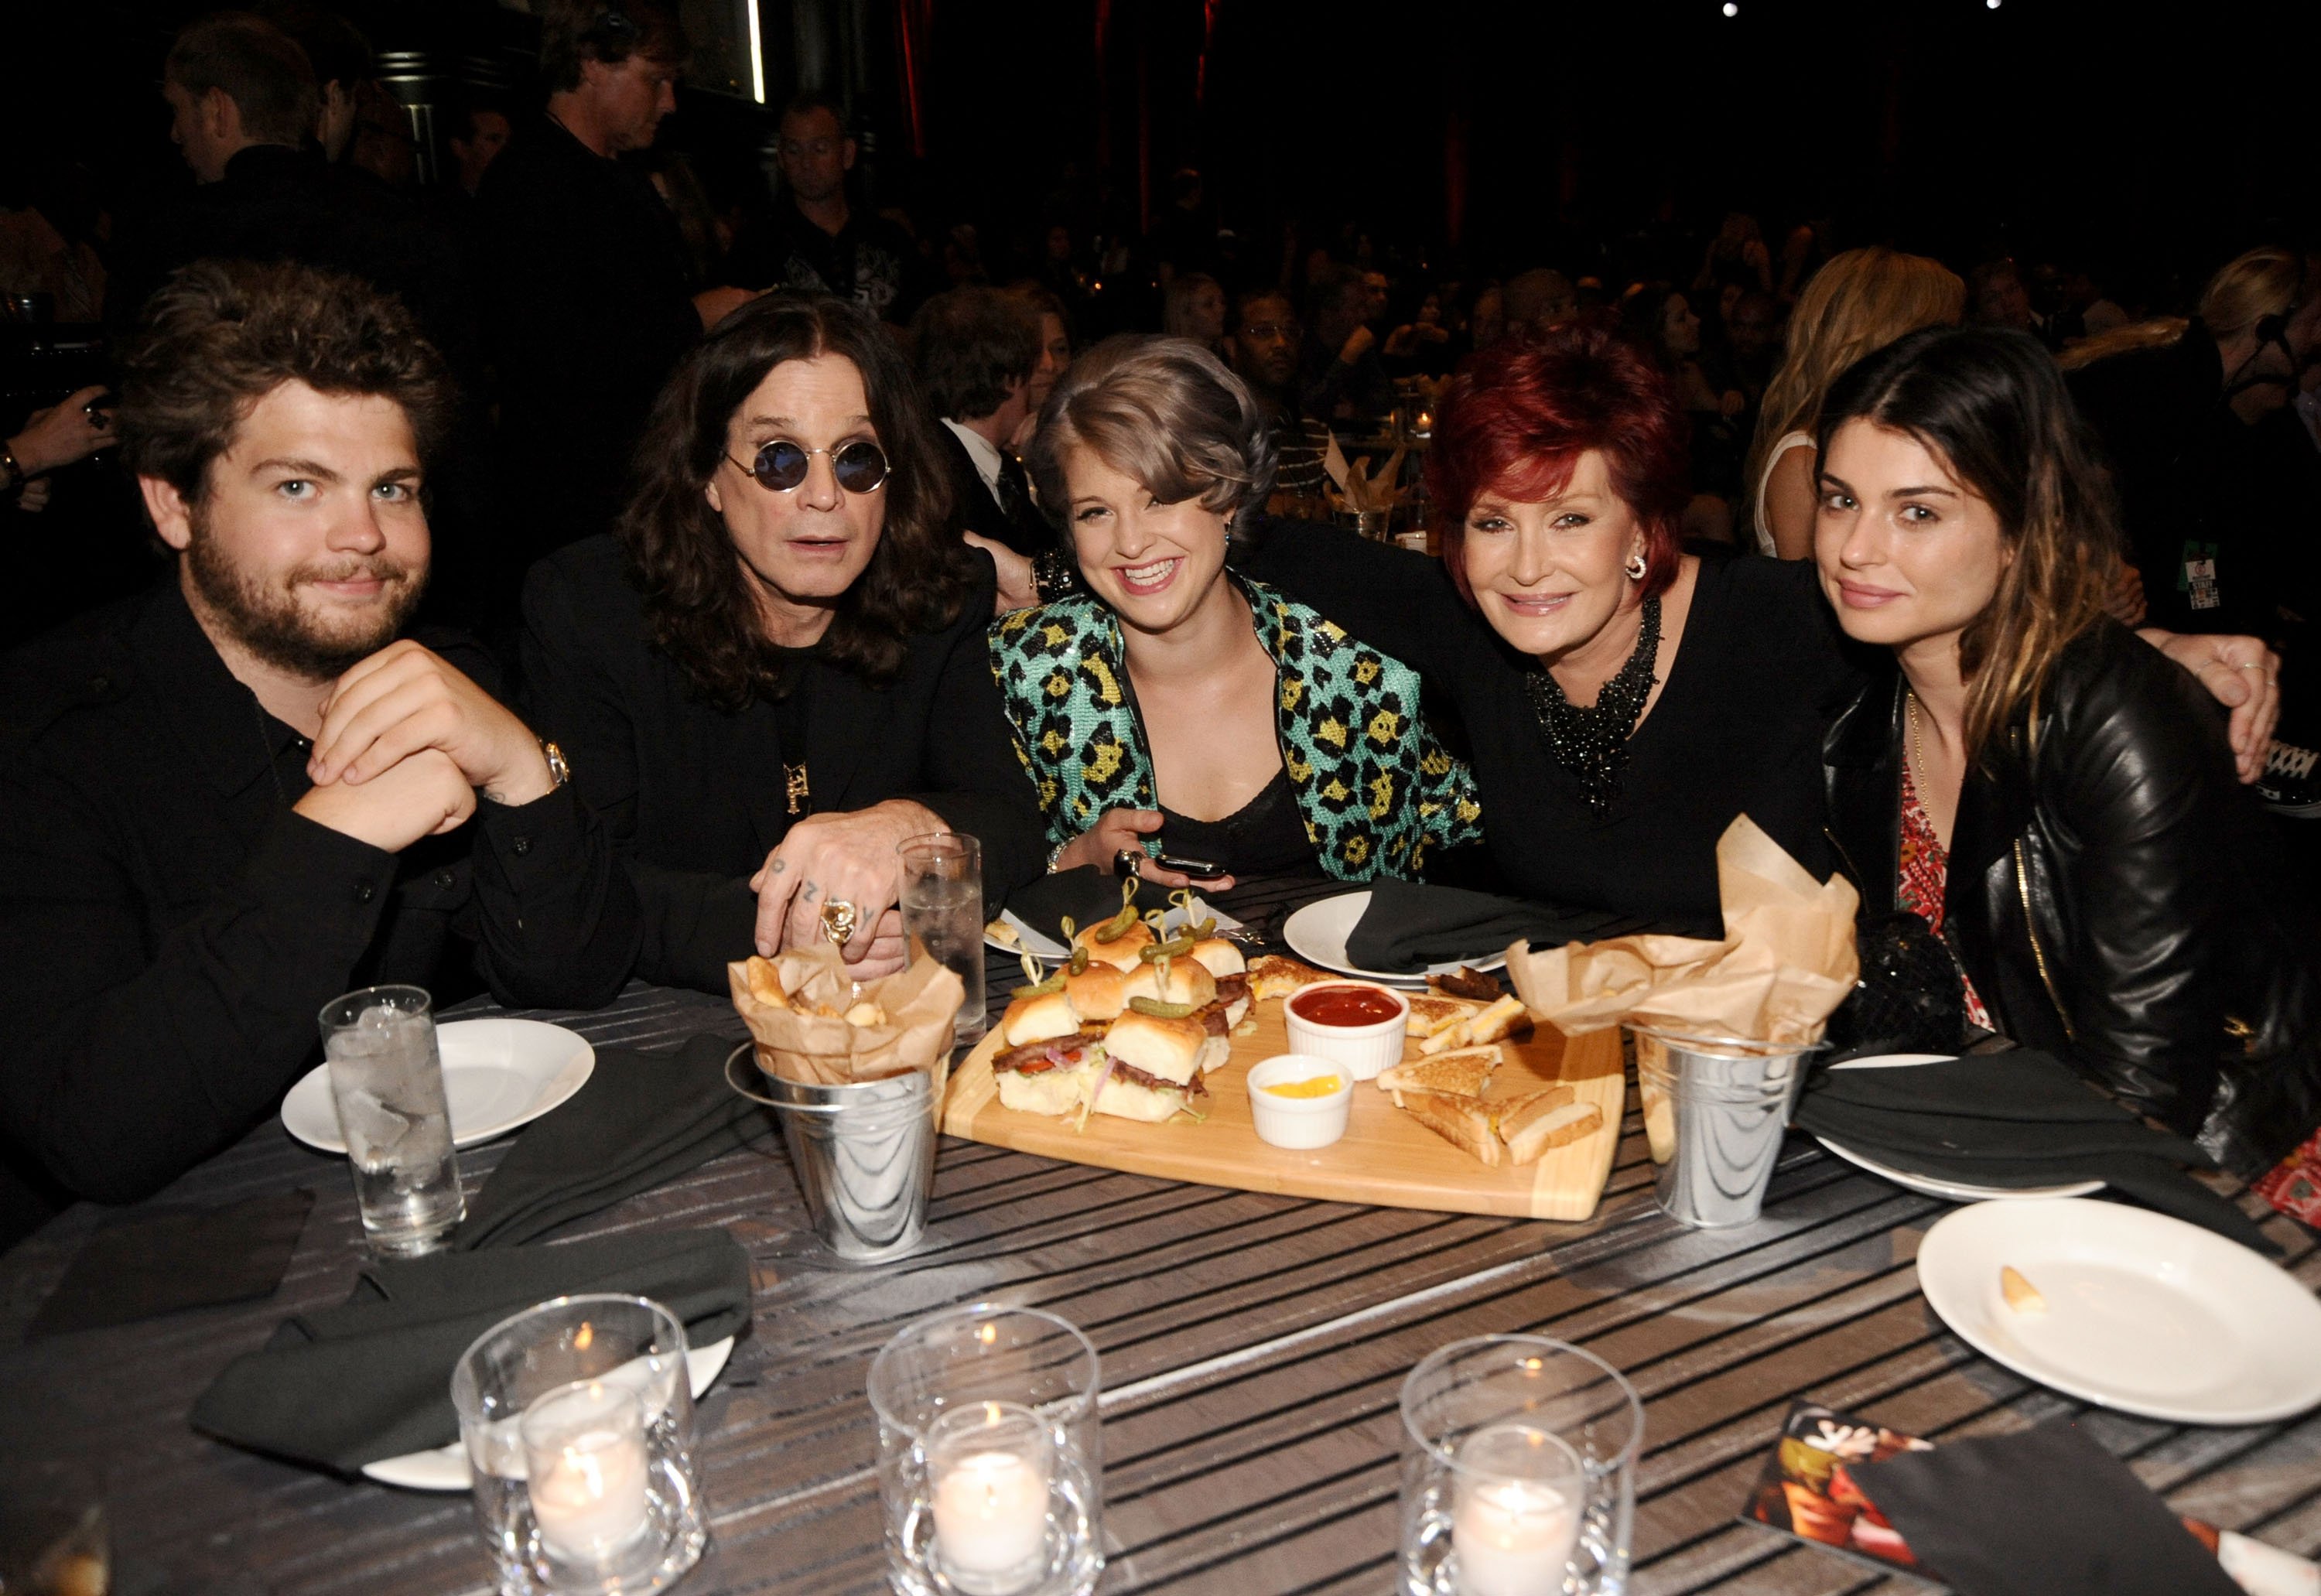 The Osbournes during a 2010 awarding event in Los Angeles. | Photo: Getty Images